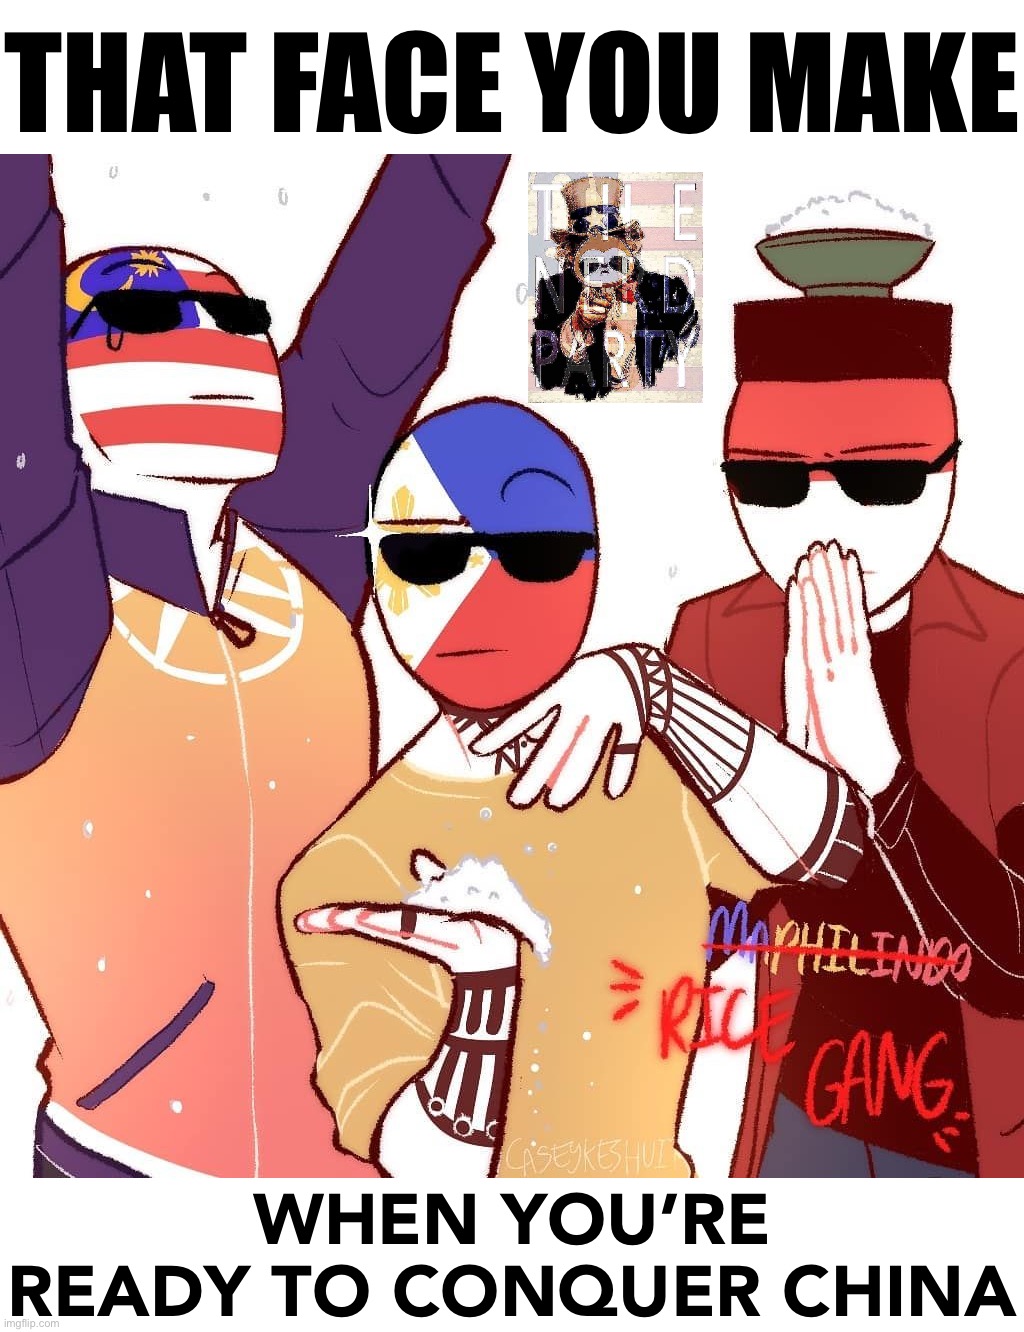 N.E.R.D. Republic’s Southeast Asian #RiceGang takes down China — as a big country, however, this campaign will take 2 years | THAT FACE YOU MAKE; WHEN YOU’RE READY TO CONQUER CHINA | image tagged in rice gang,china,southeast asia,ricegang,nerd party,boi | made w/ Imgflip meme maker